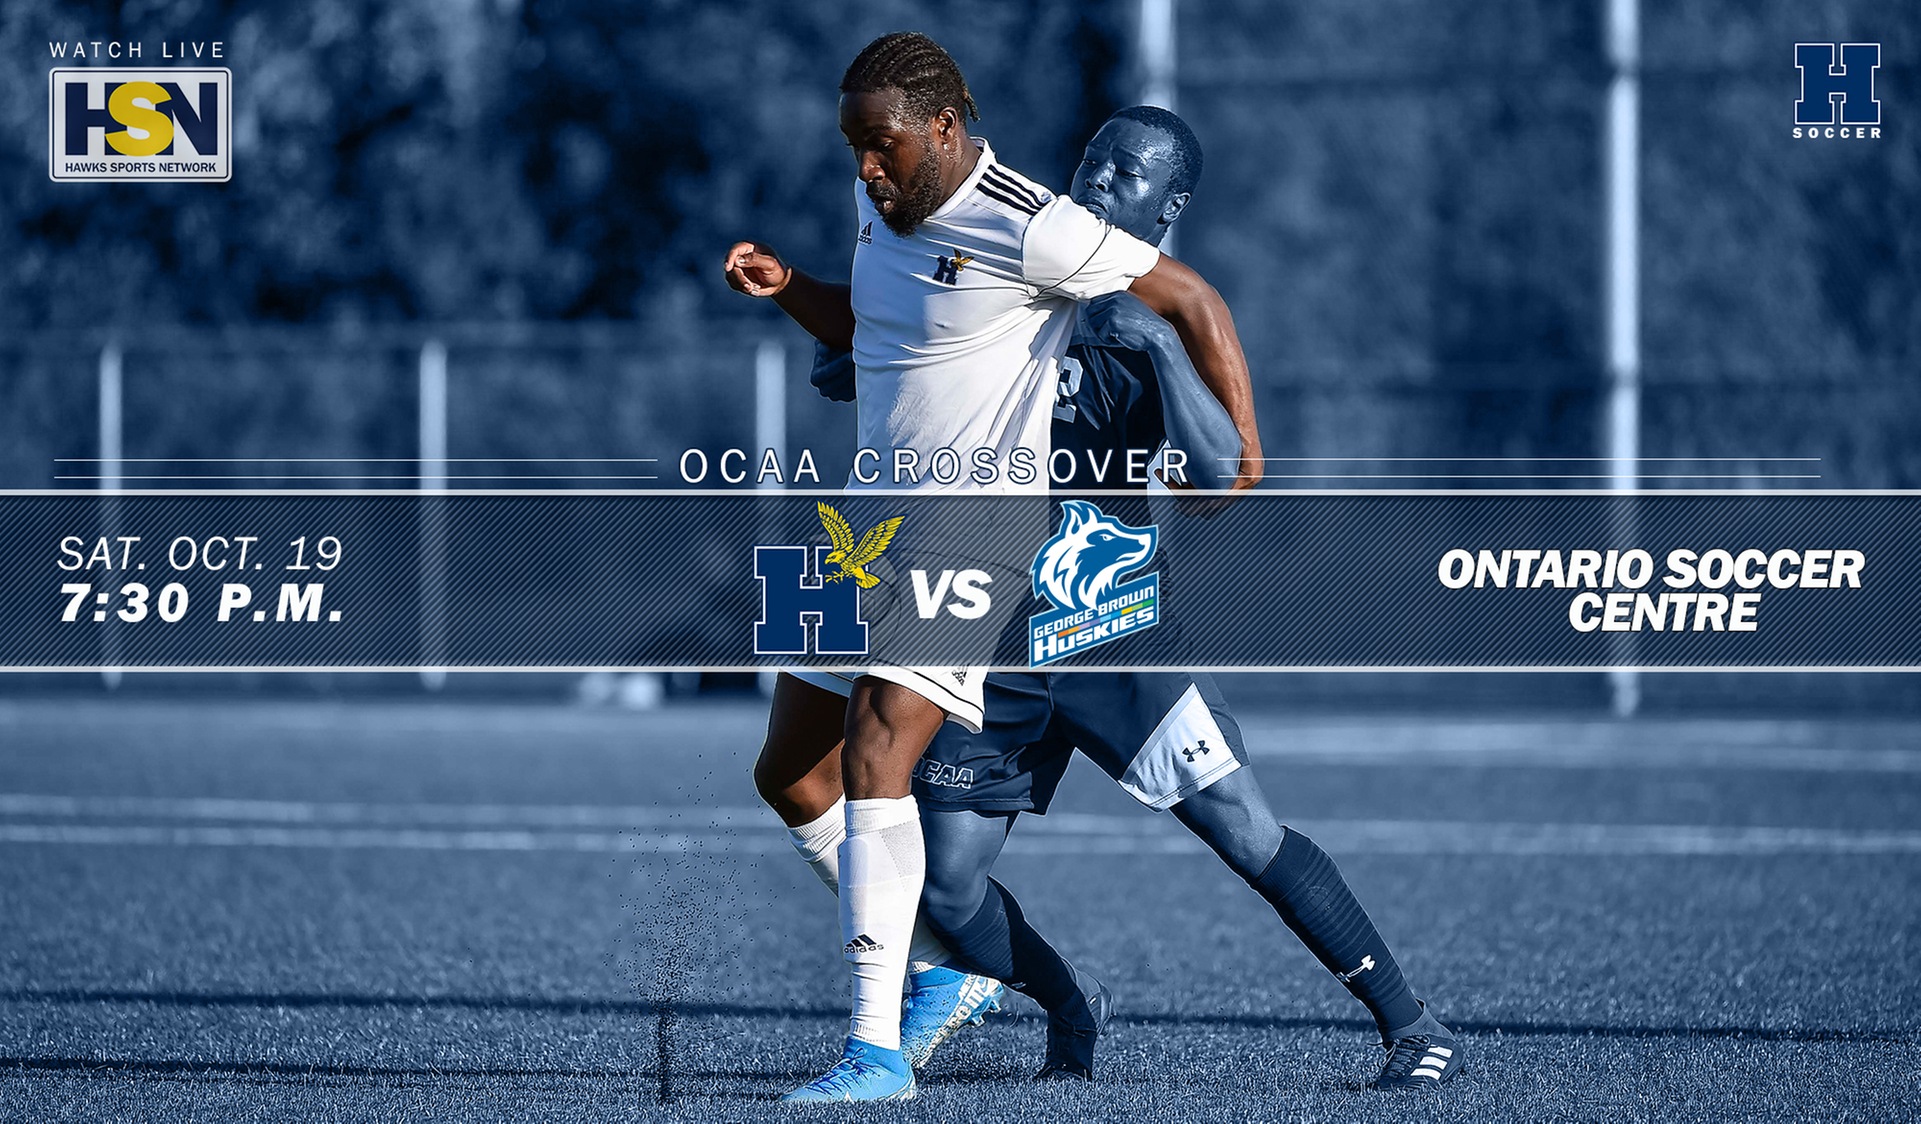 Tough Test Awaits as No. 12 Men's Soccer Gears Up to Defend Title